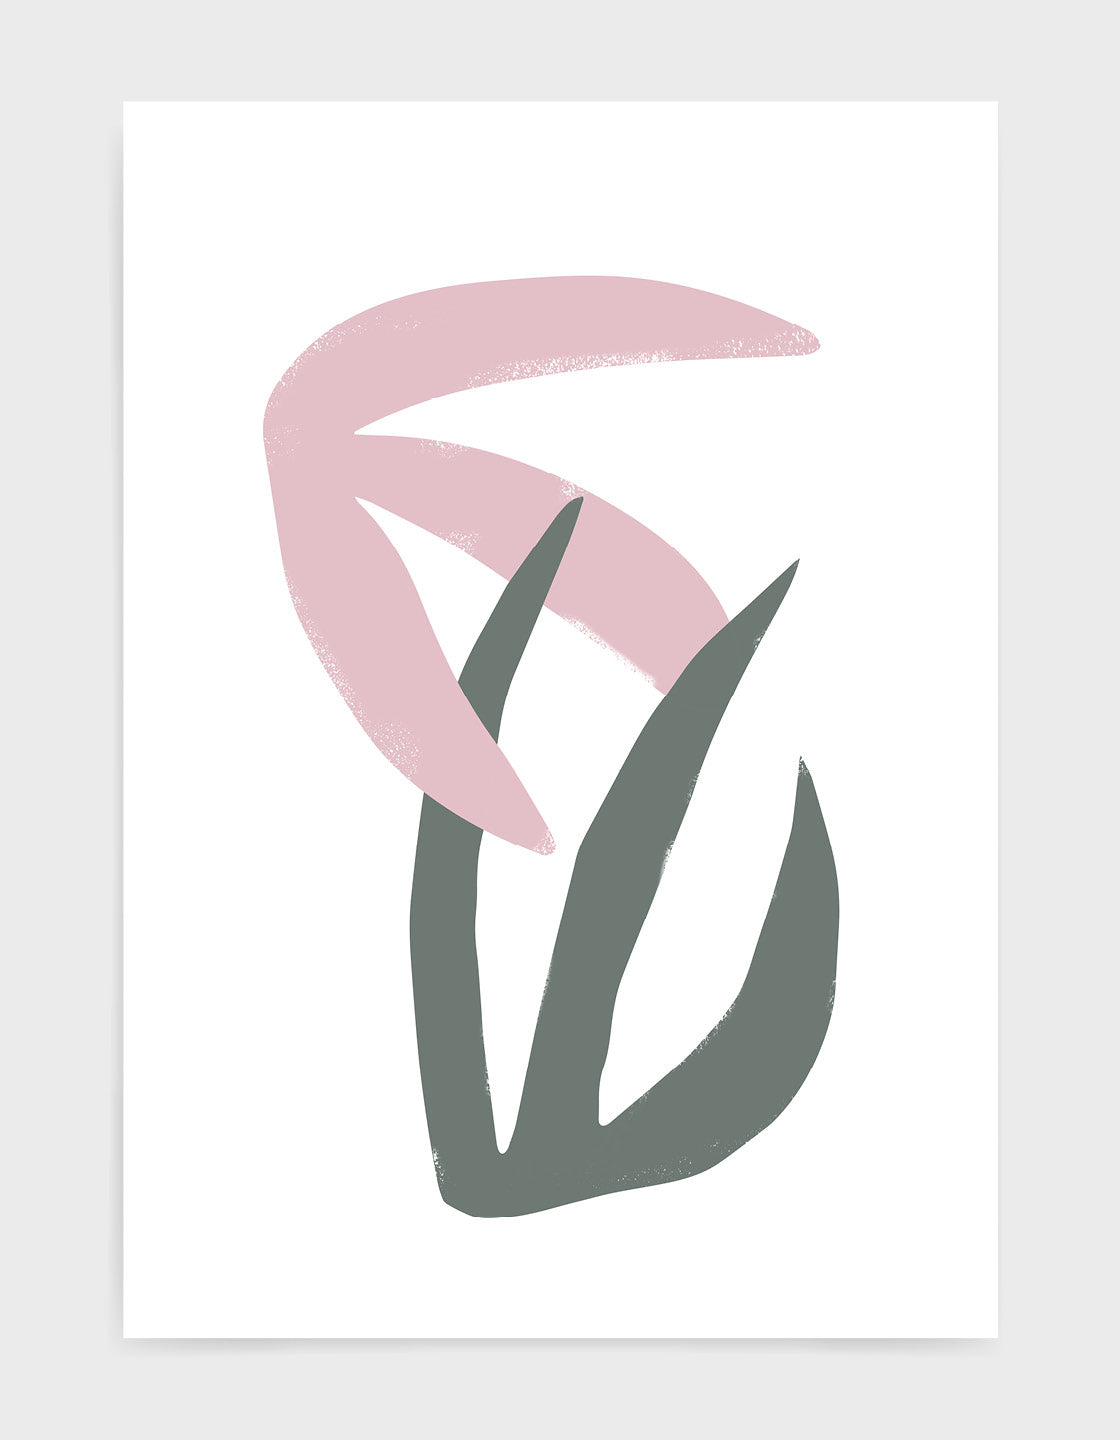 Matisse style interlocking leaf print with pink and grey wide frond leaves against a white background